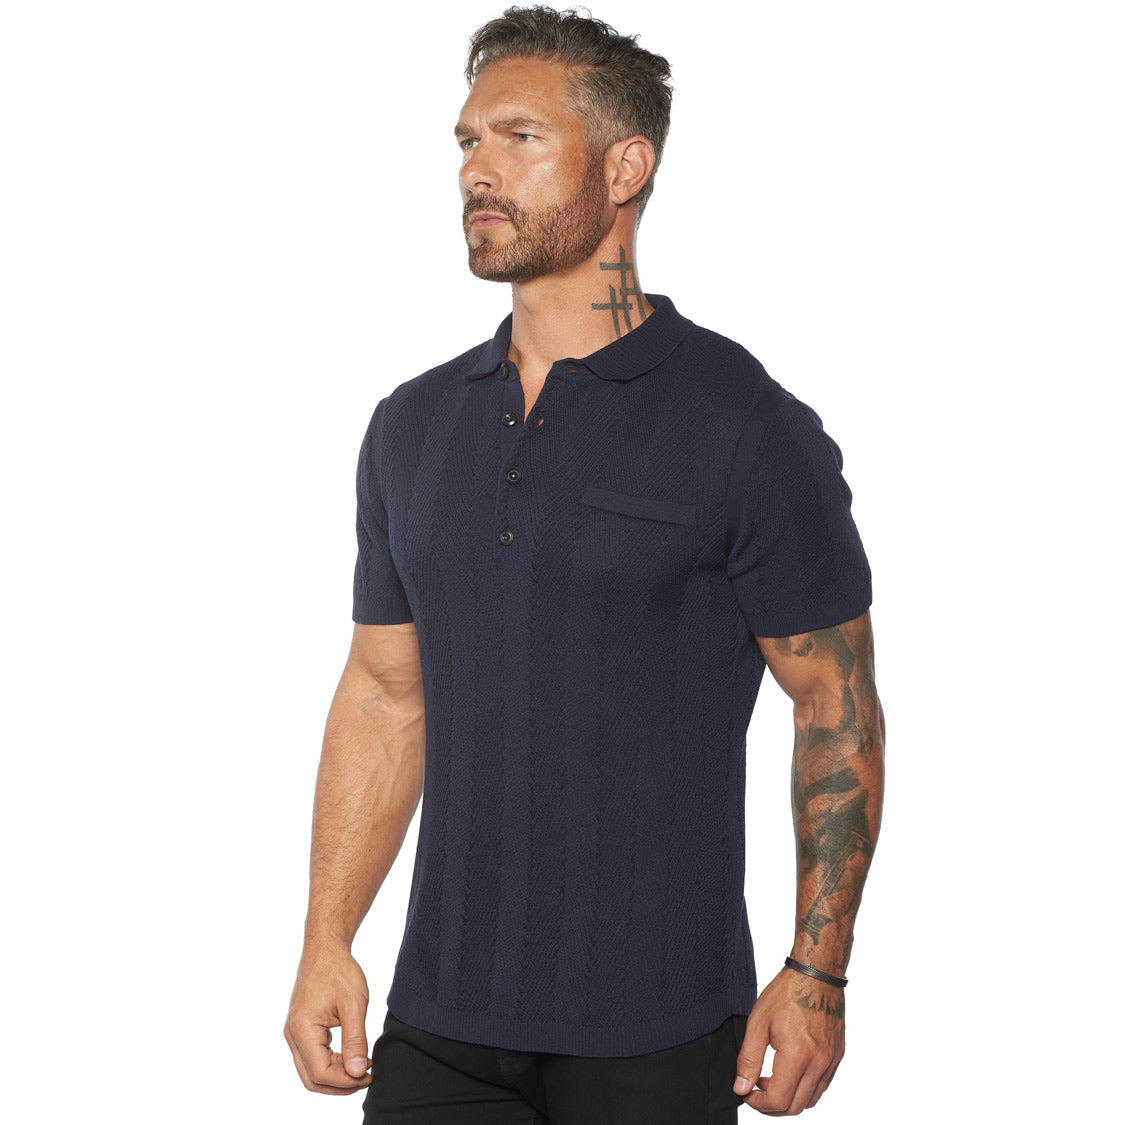 The Alastair Men's Slim Fit Knit Polo Shirt